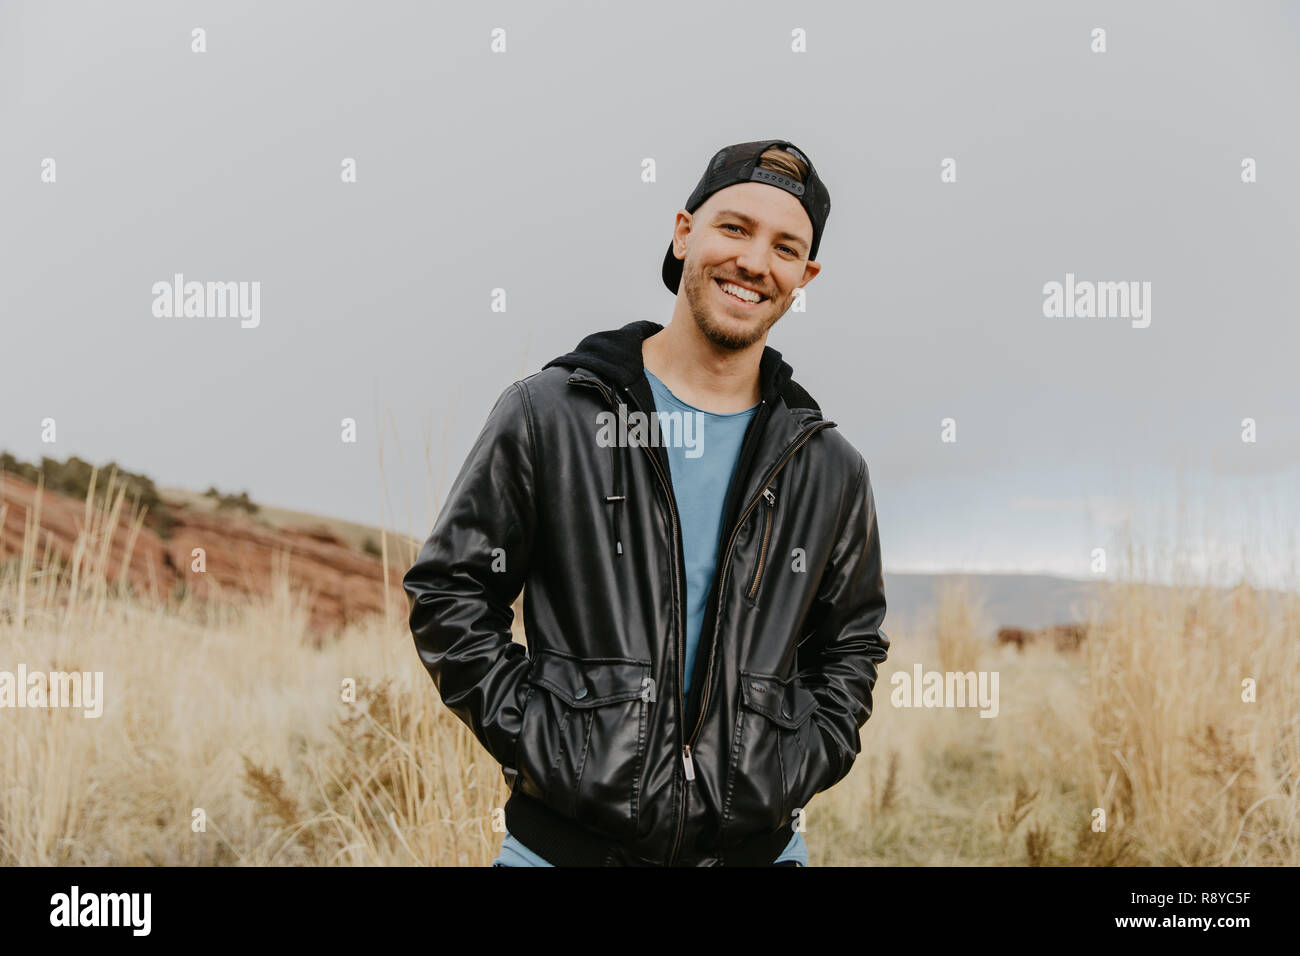 Portrait of Young Good Looking Handsome Man Smiling with Backwards Hat, Leather Jacket Outside in Isolated Rural Field of Tall Grass in the Mountain Stock Photo